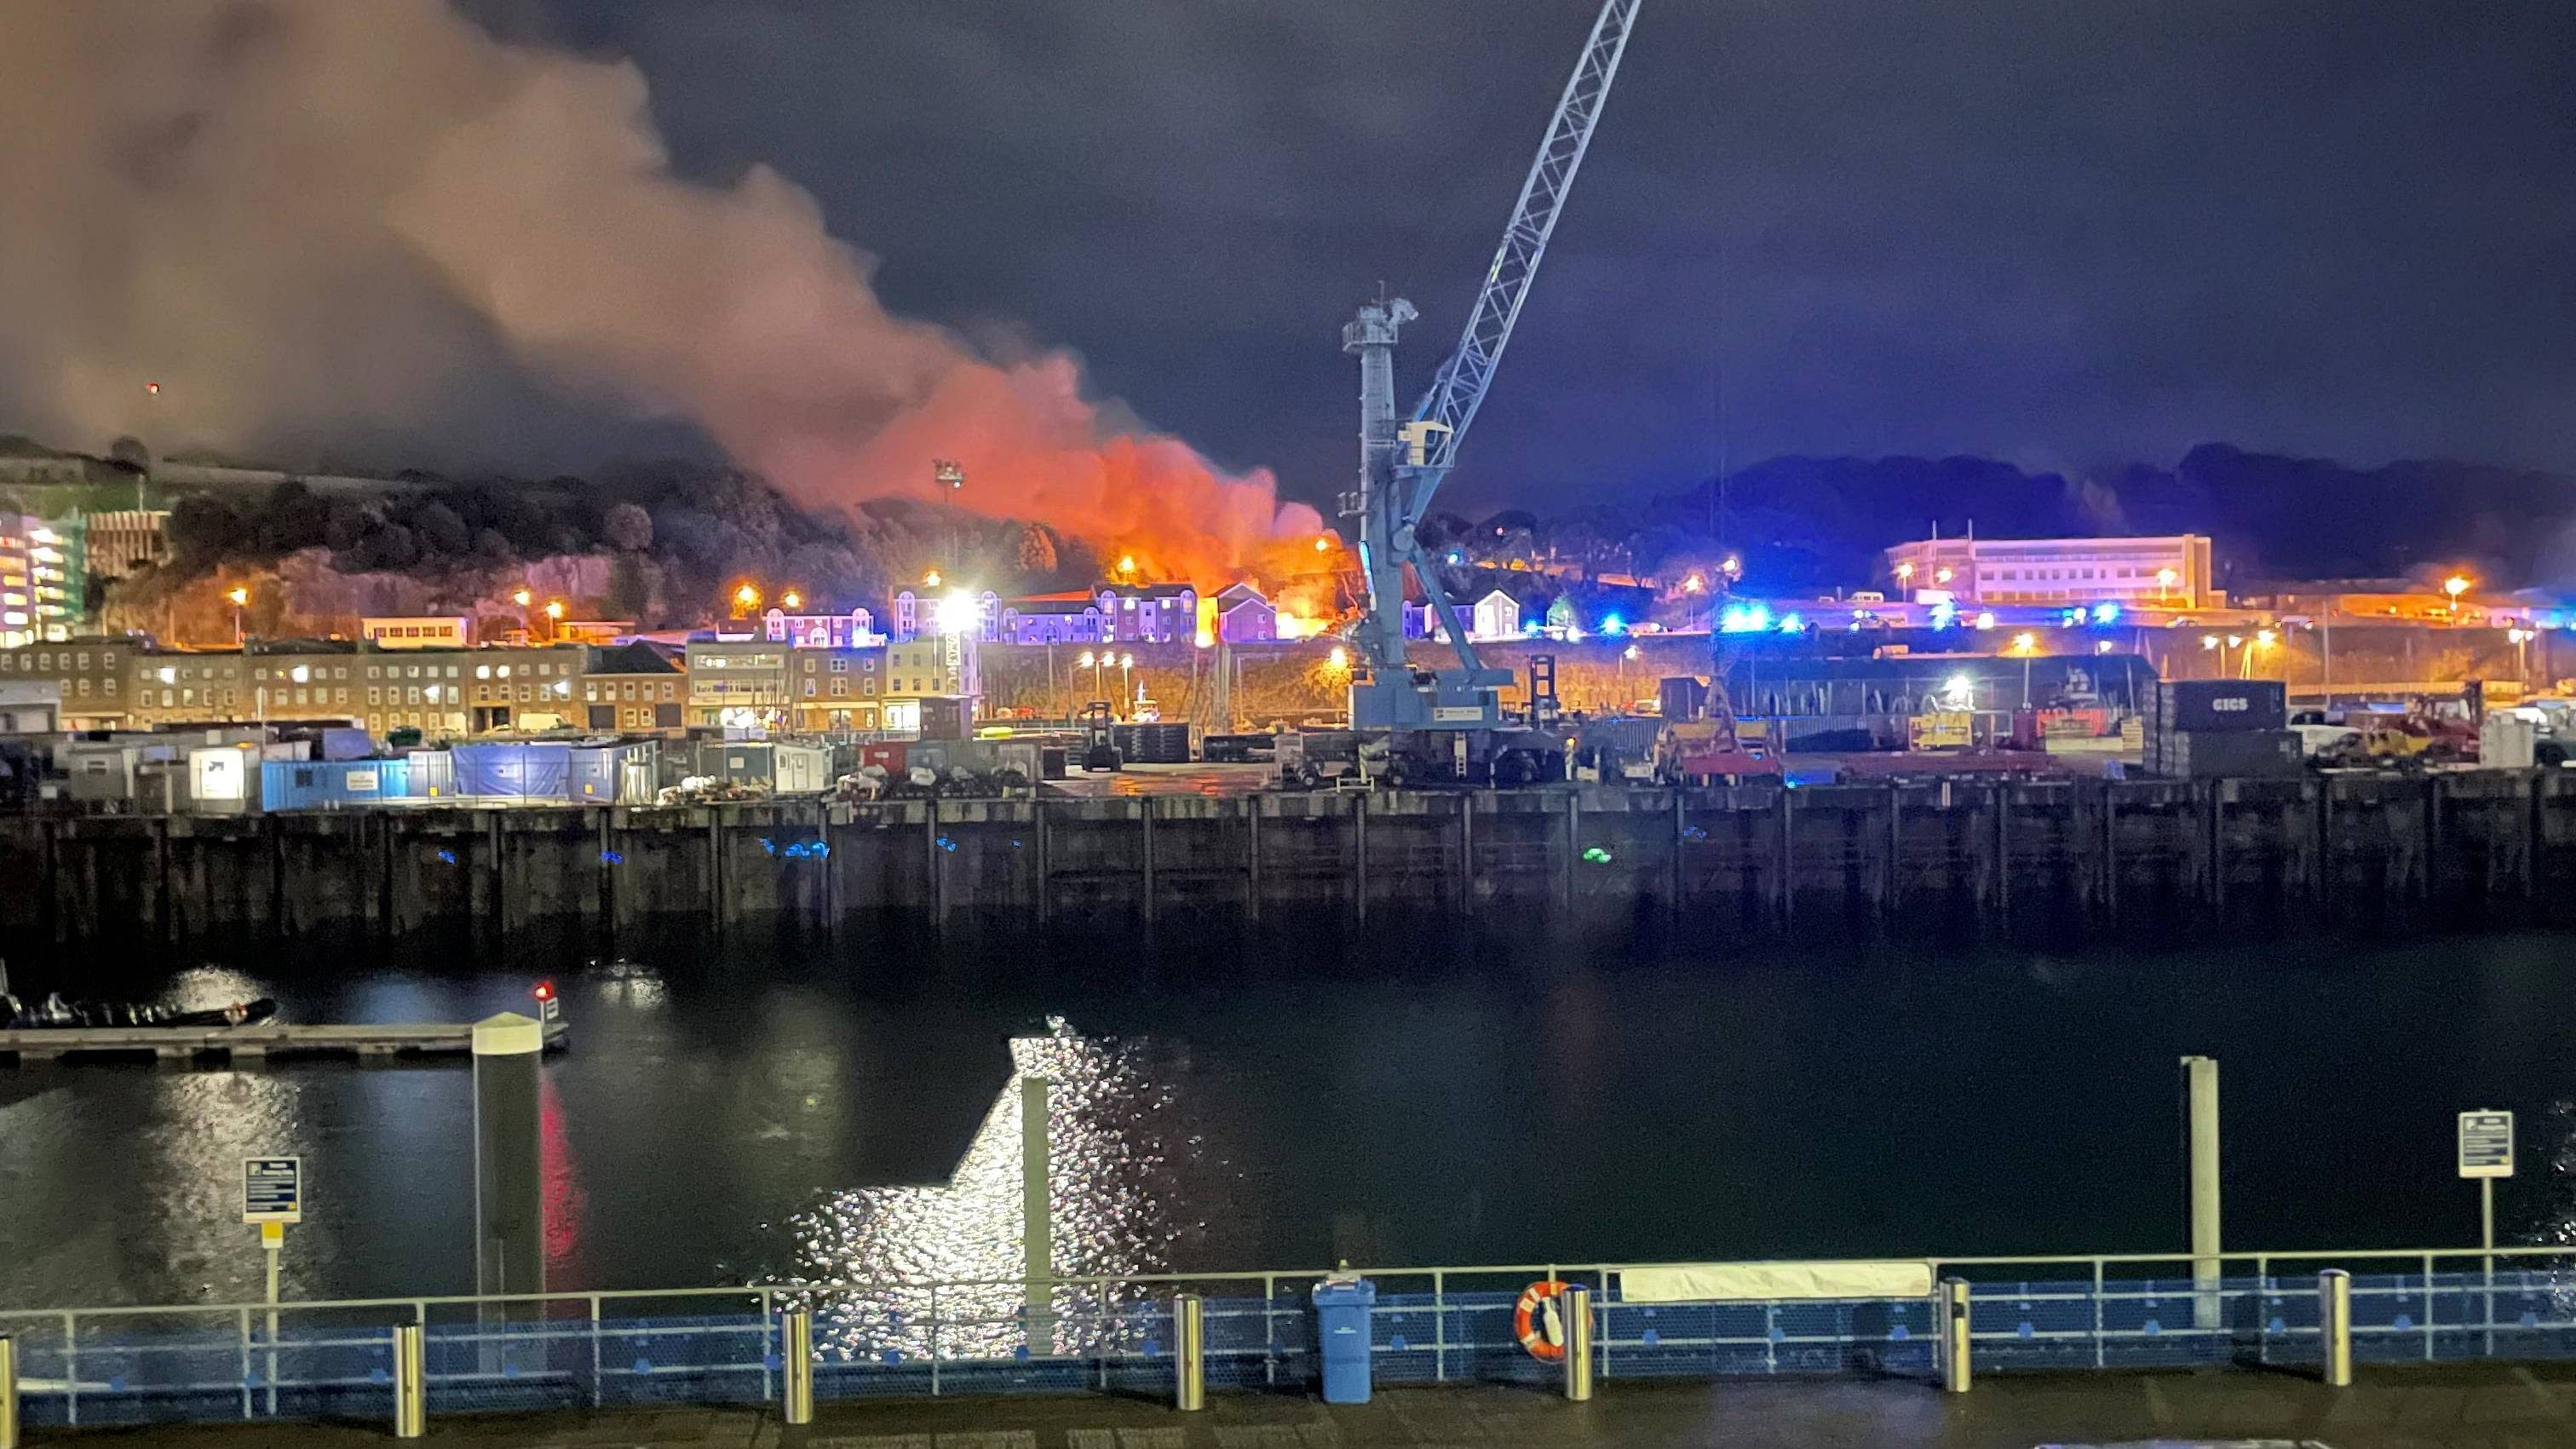 A general view of fire and smoke in Saint Helier following an explosion on the island of Jersey. Credit: Daniel Hunt via Reuters